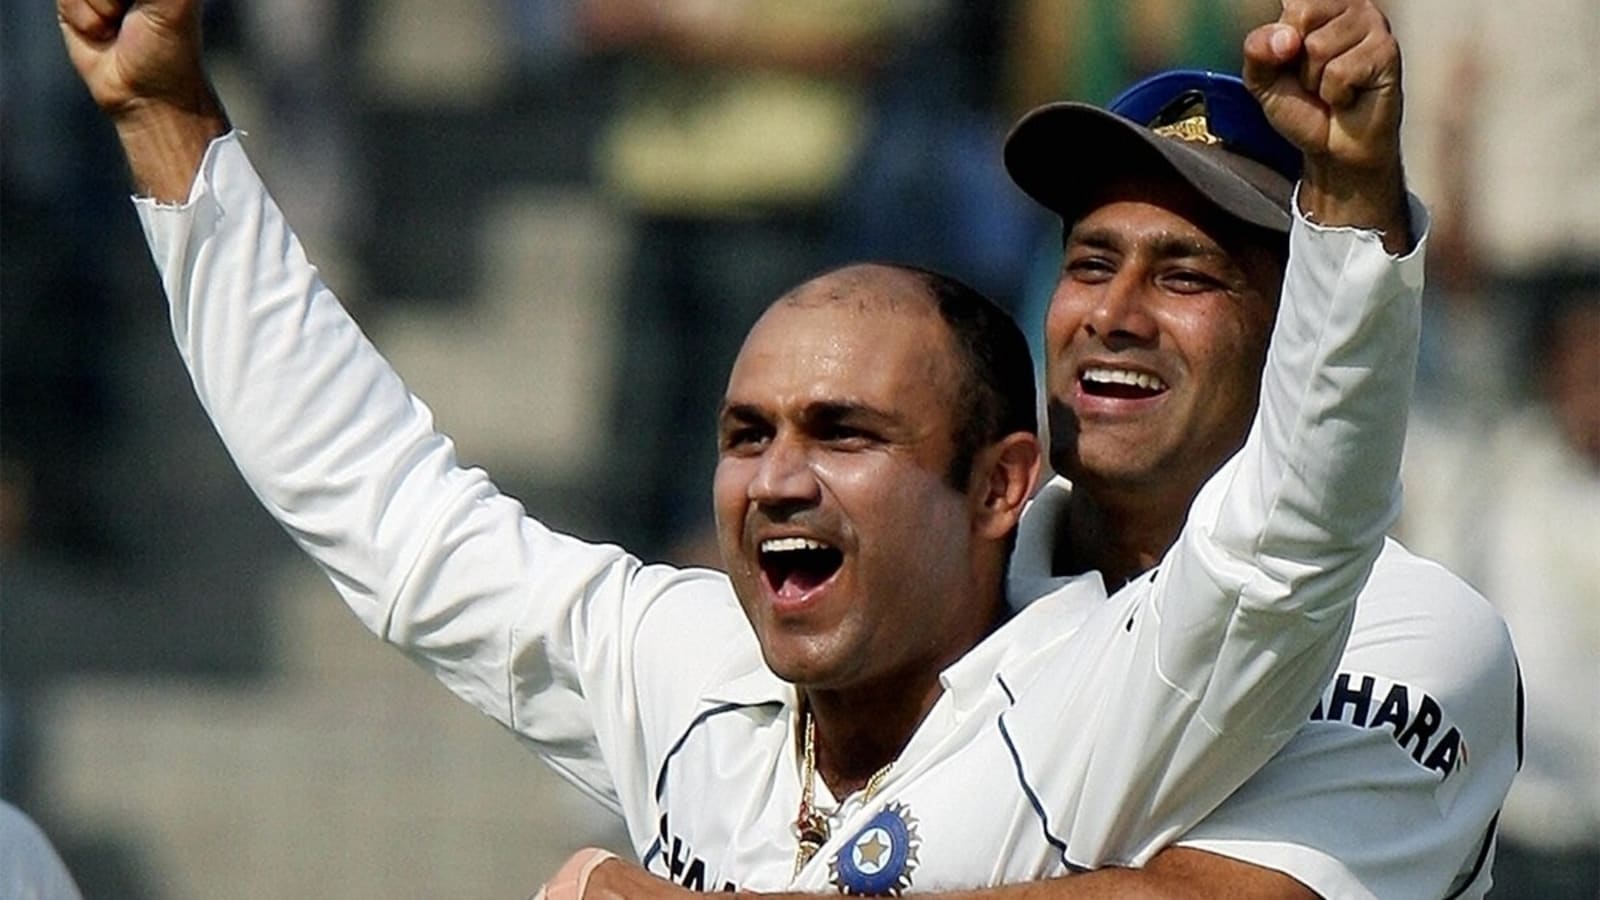 Virender Sehwag reveals how Kumble revived his Test career